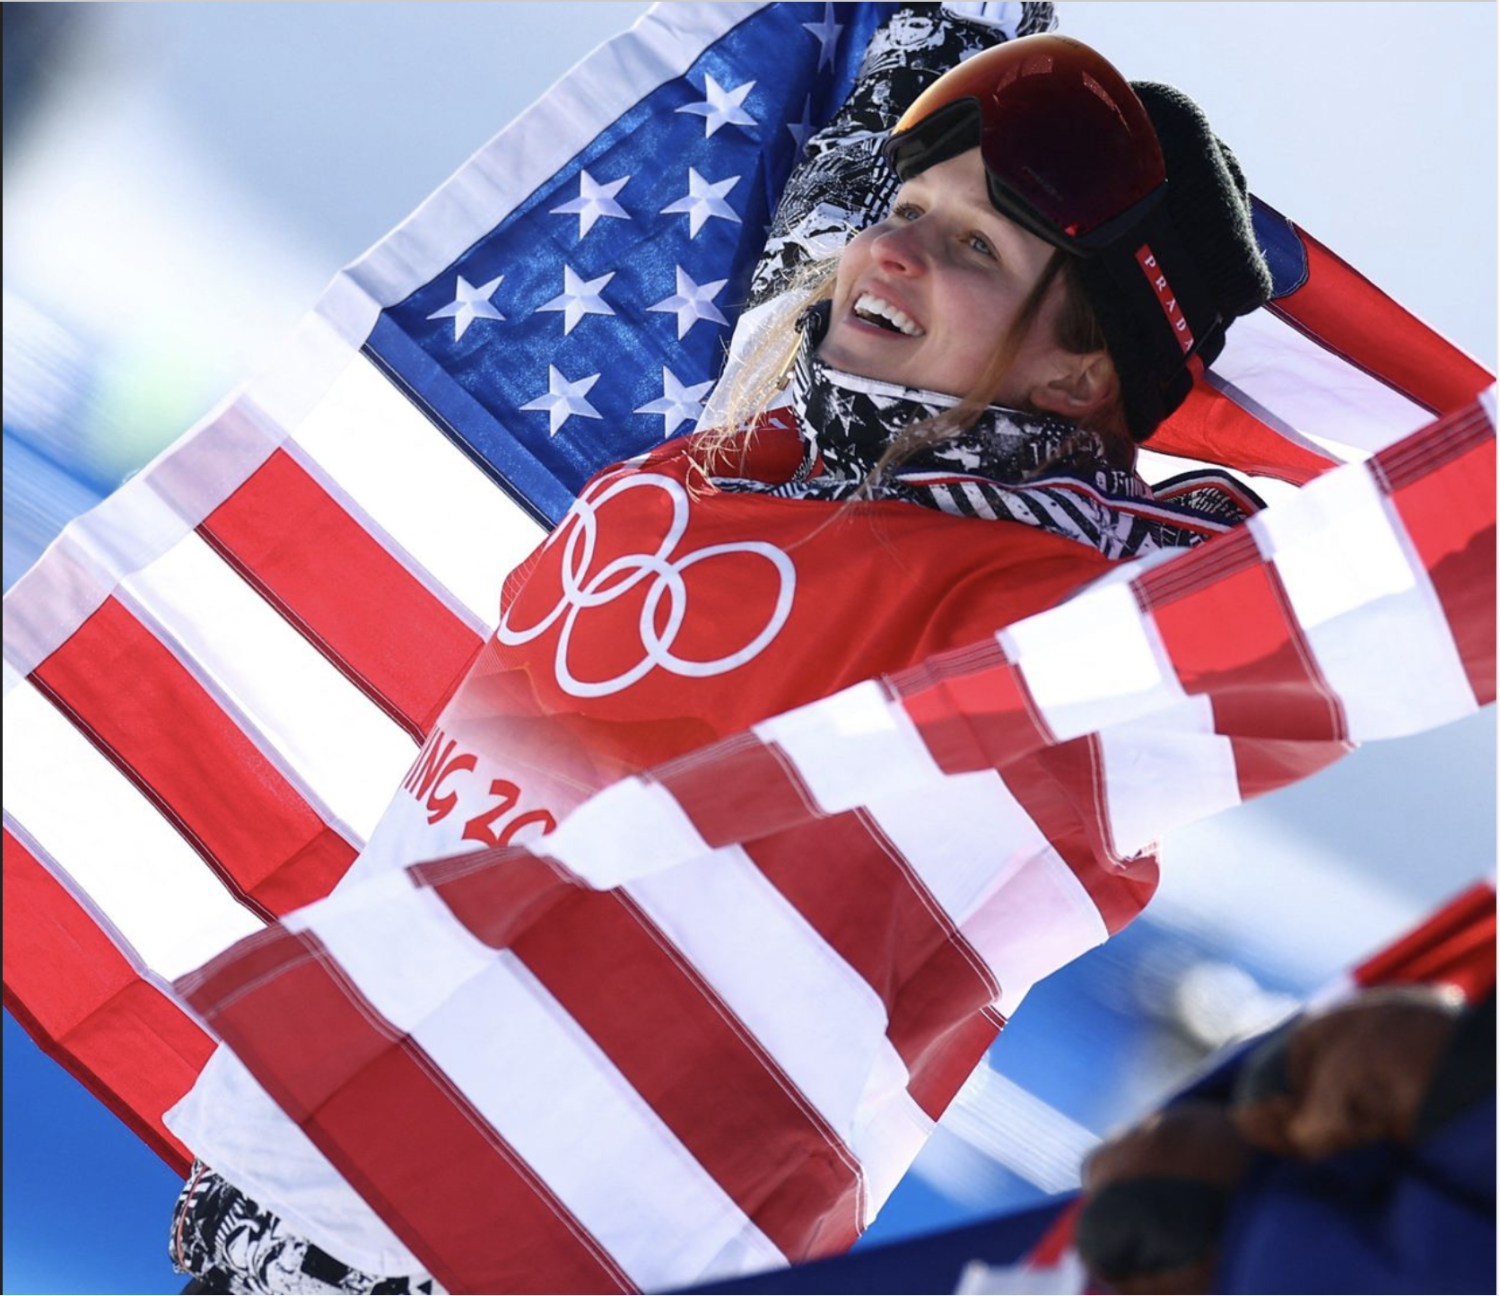 Julia Marino won silver in the women’s slopestyle at the Beijing Games. LISI NIESNER/REUTERS